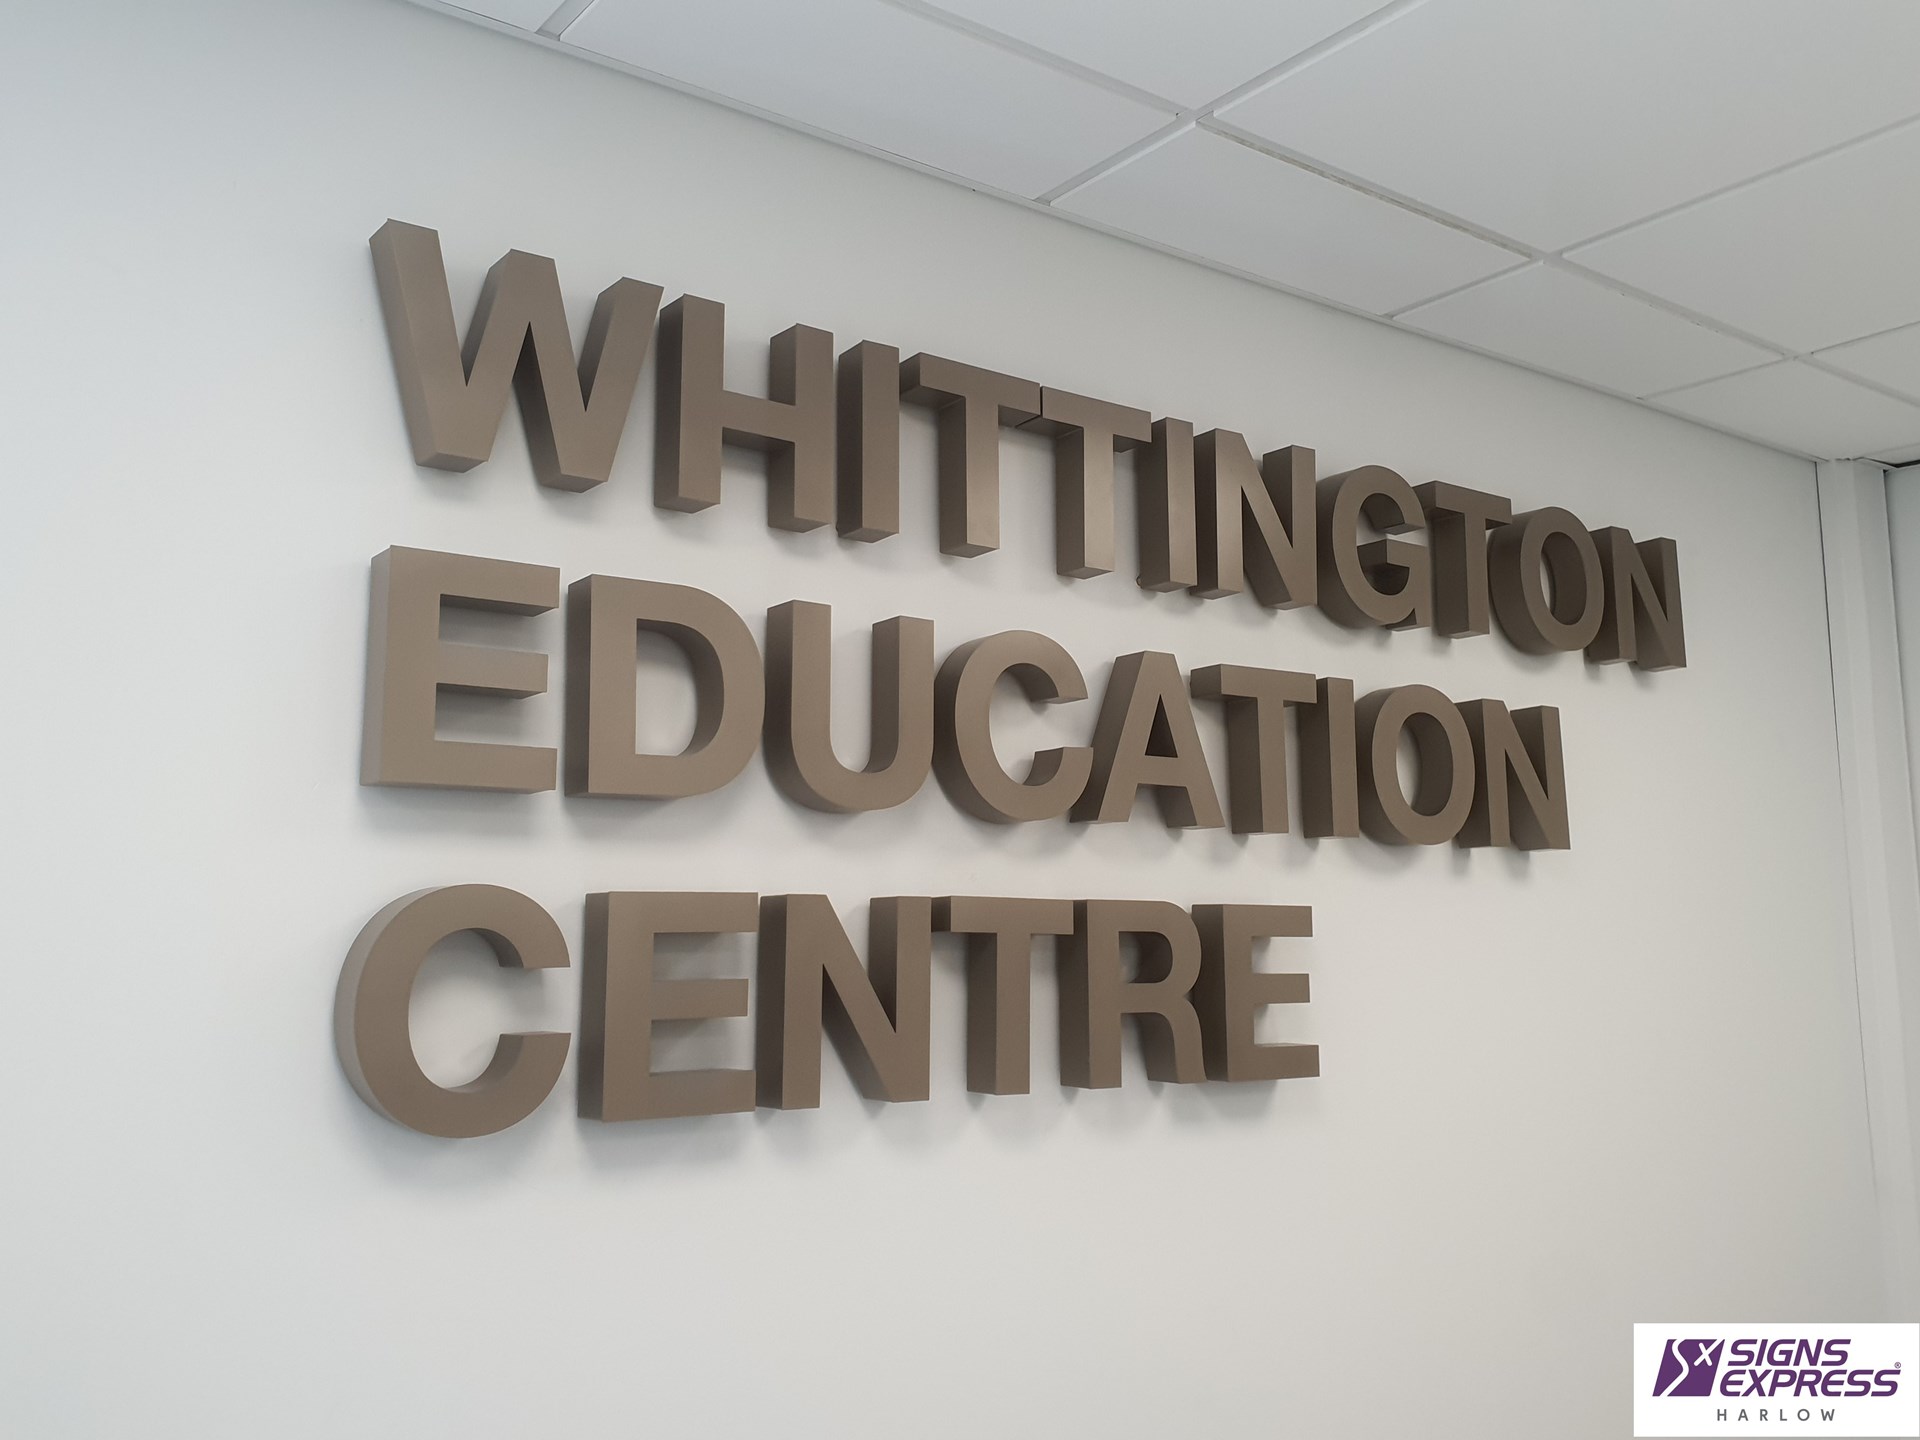 Reception Signage At Whittington NHS Trust Education Centre By Signs Express Harlow